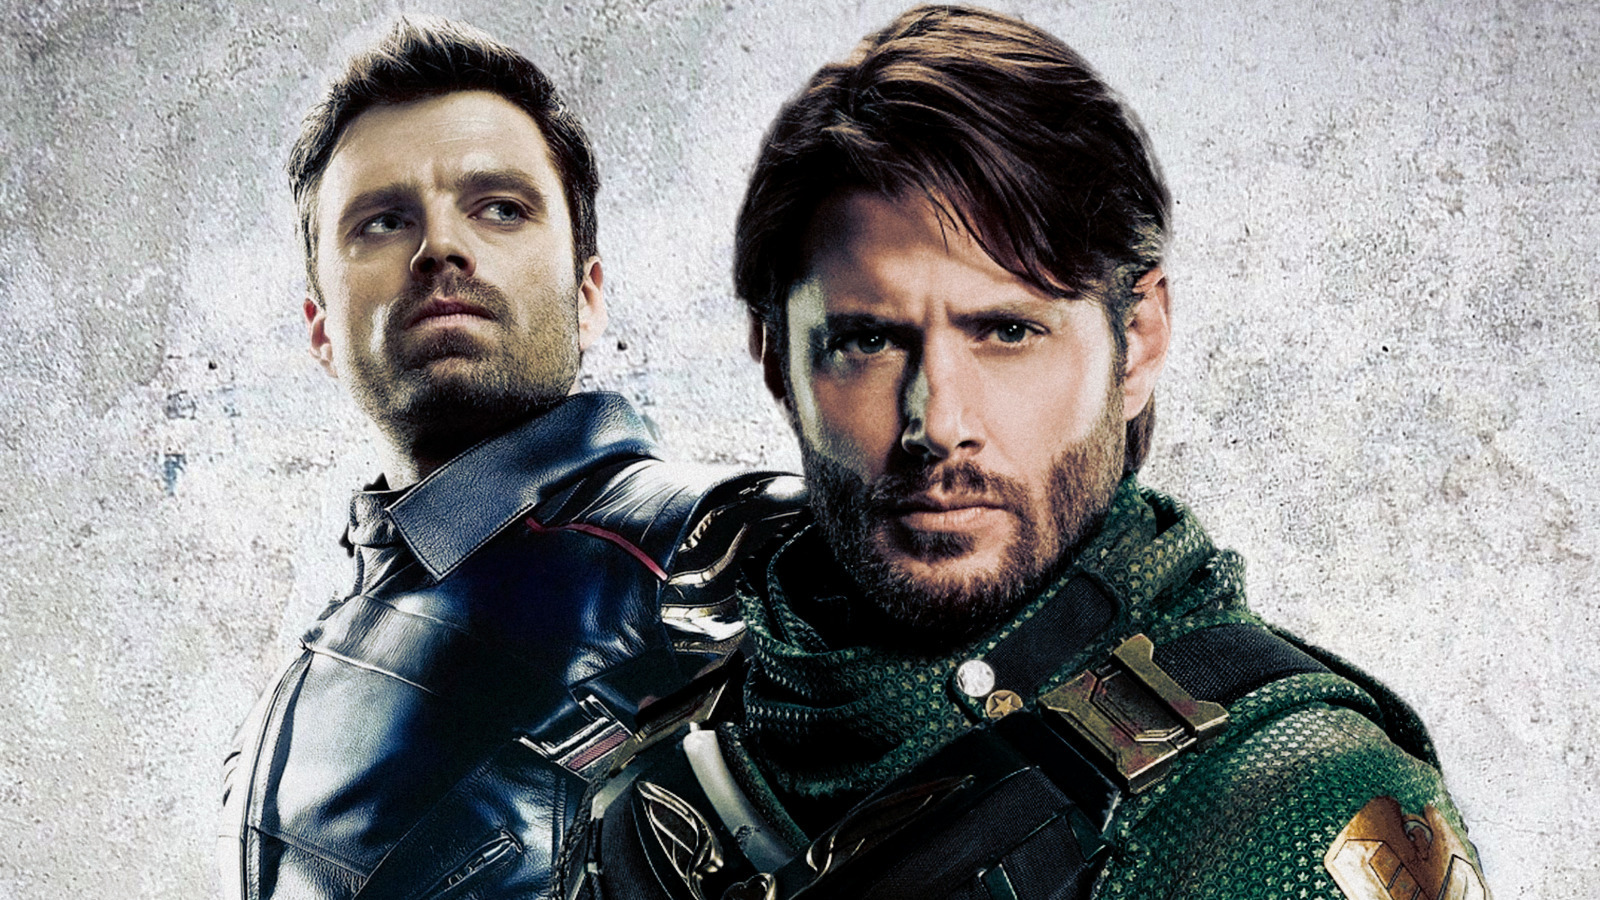 #How The Boys Season 3 Is Setting Up The Perfect Winter Soldier Spoof